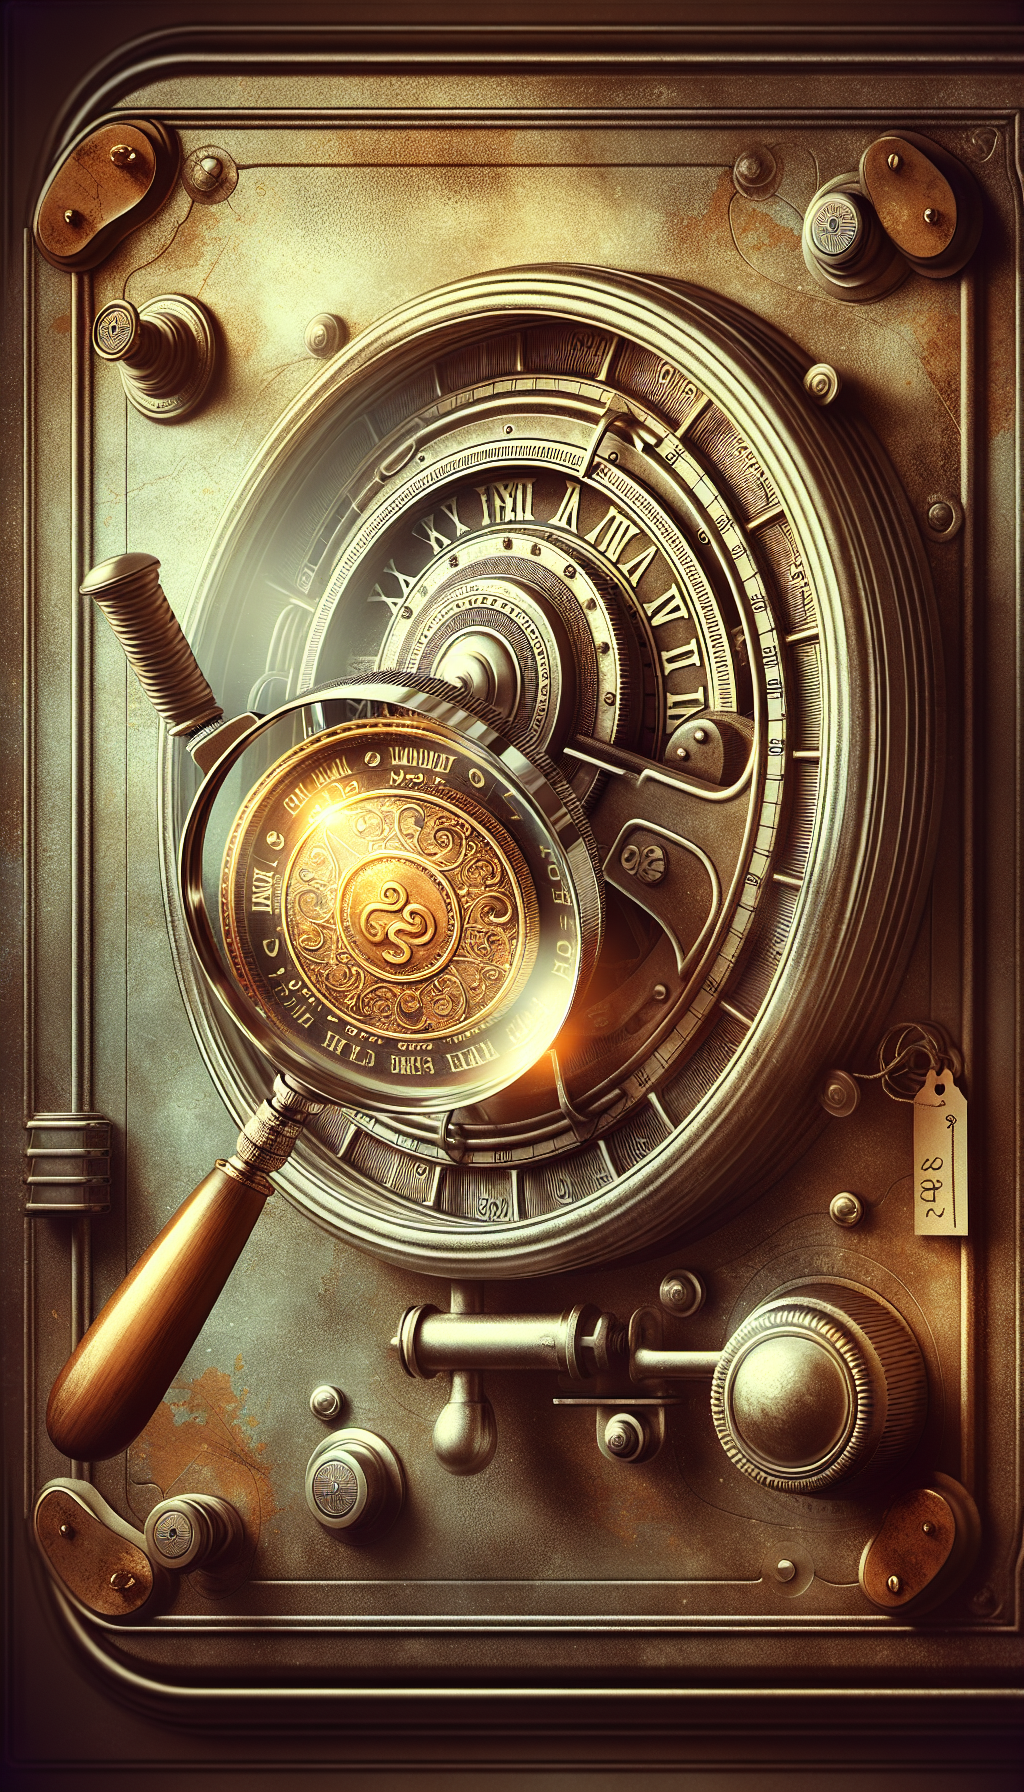 An illustration depicts a magnifying glass hovering over an intricate, vintage safe dial with Roman numerals signifying its age. Through the lens, we see a shimmering coin and a price tag, blending the past with its monetary worth, symbolizing the discovery of the safe's value. The image is stylized with sepia tones and steampunk elements, emphasizing antiquity and worth.